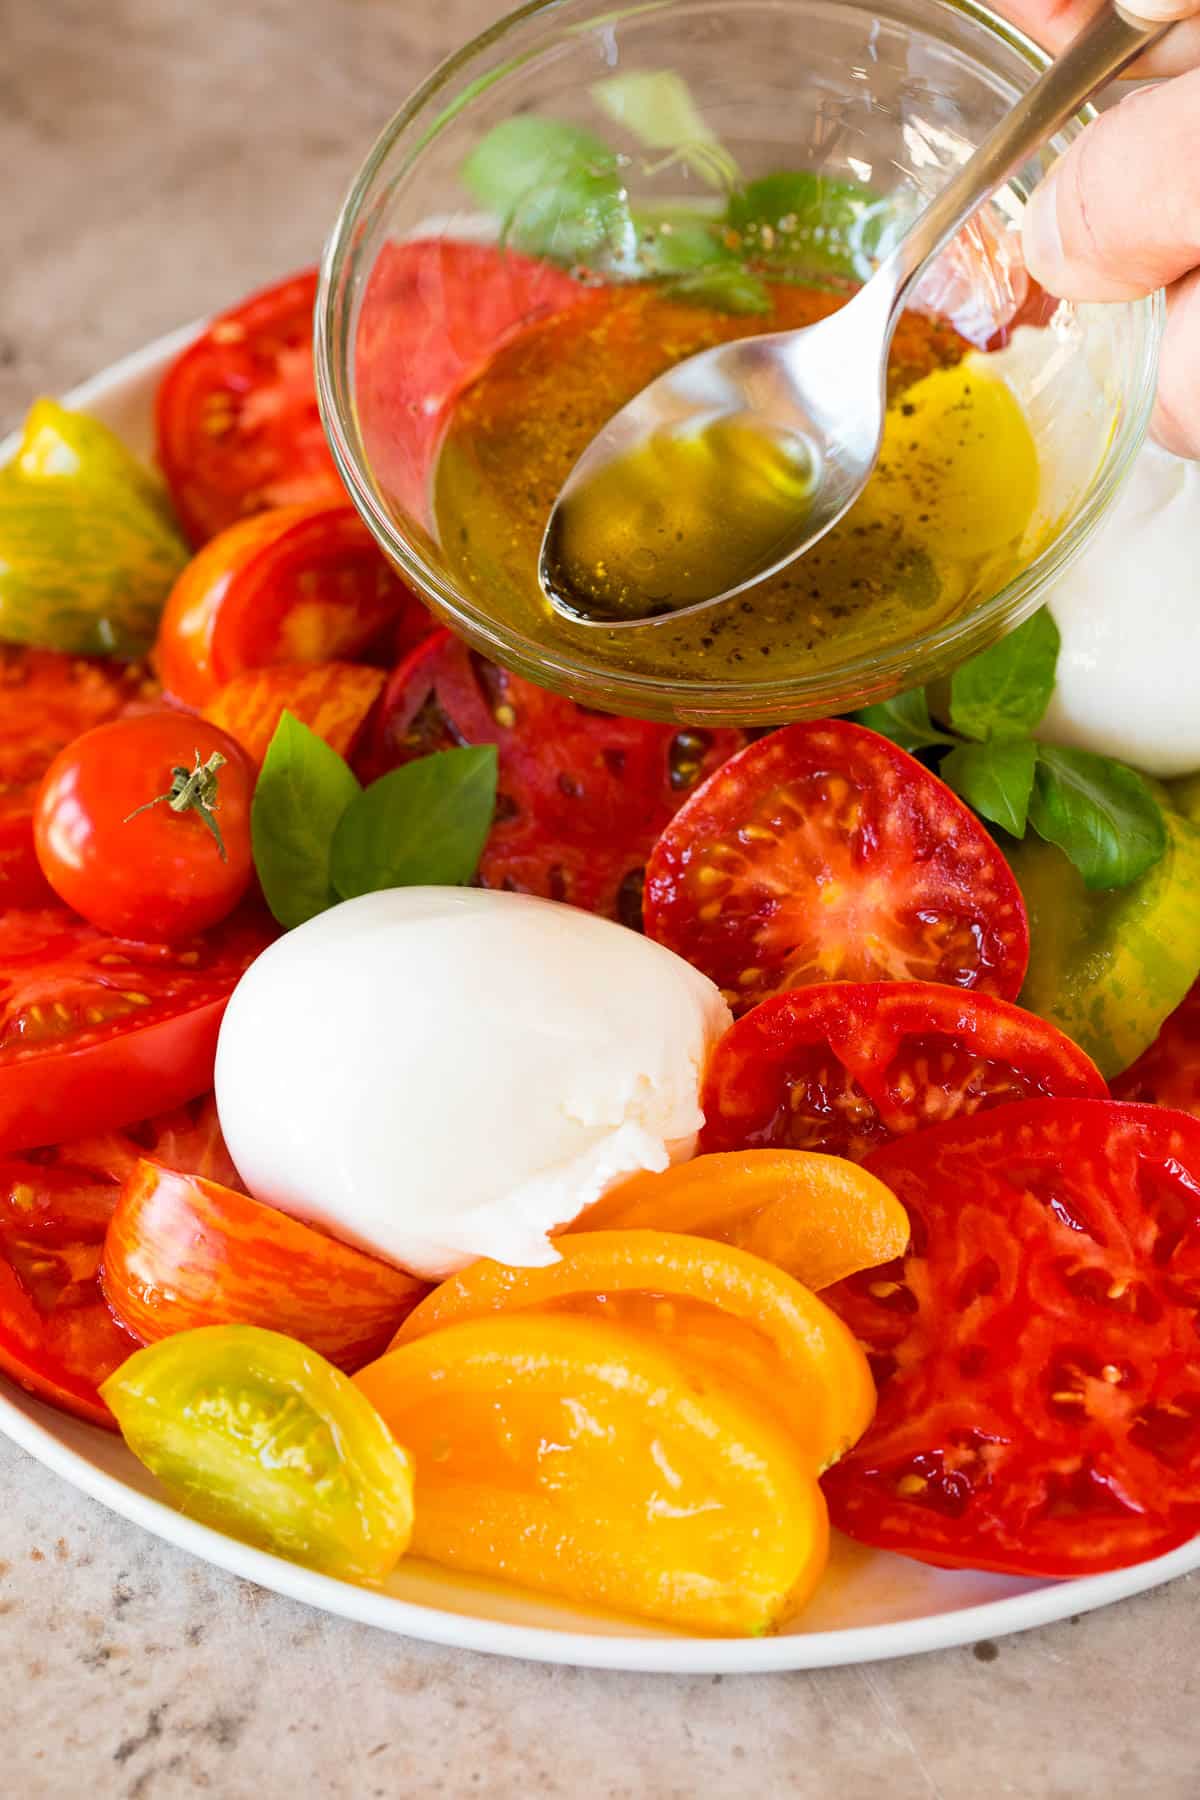 Dressing being poured over tomato and cheese salad.